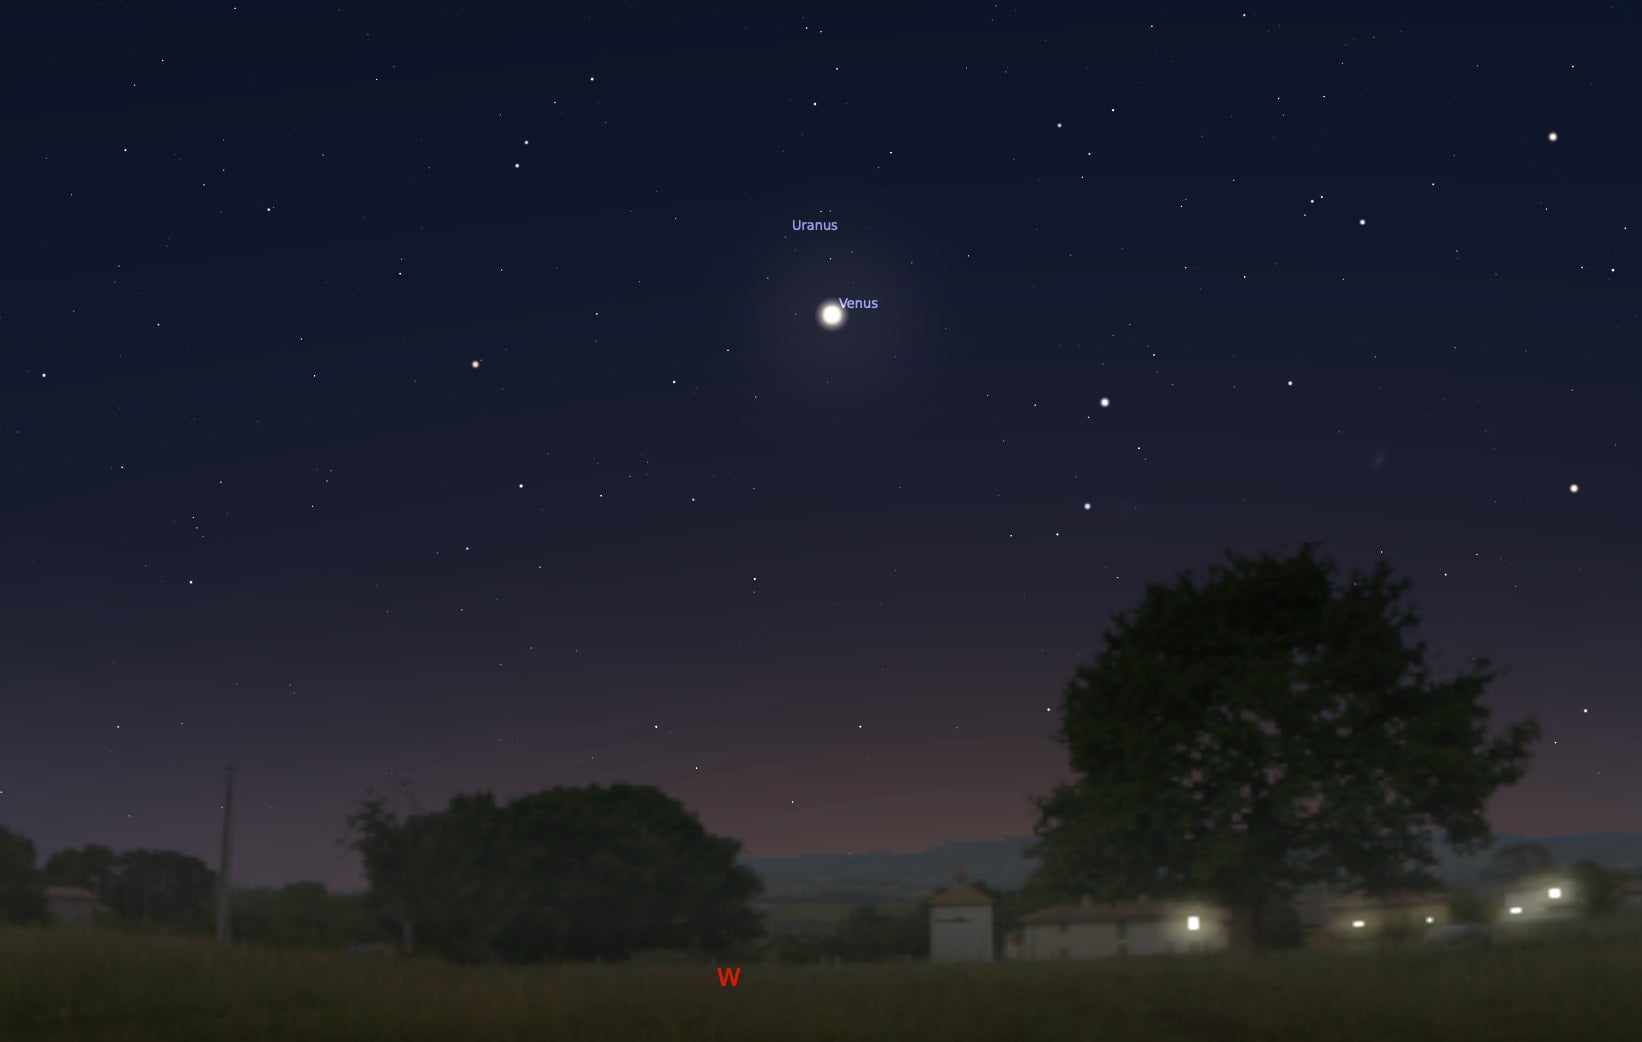 A horizon at night, with Venus high in the sky and Uranus directly overhead as they will appear in the planetary alignment on Tuesday, March 28, 2023.